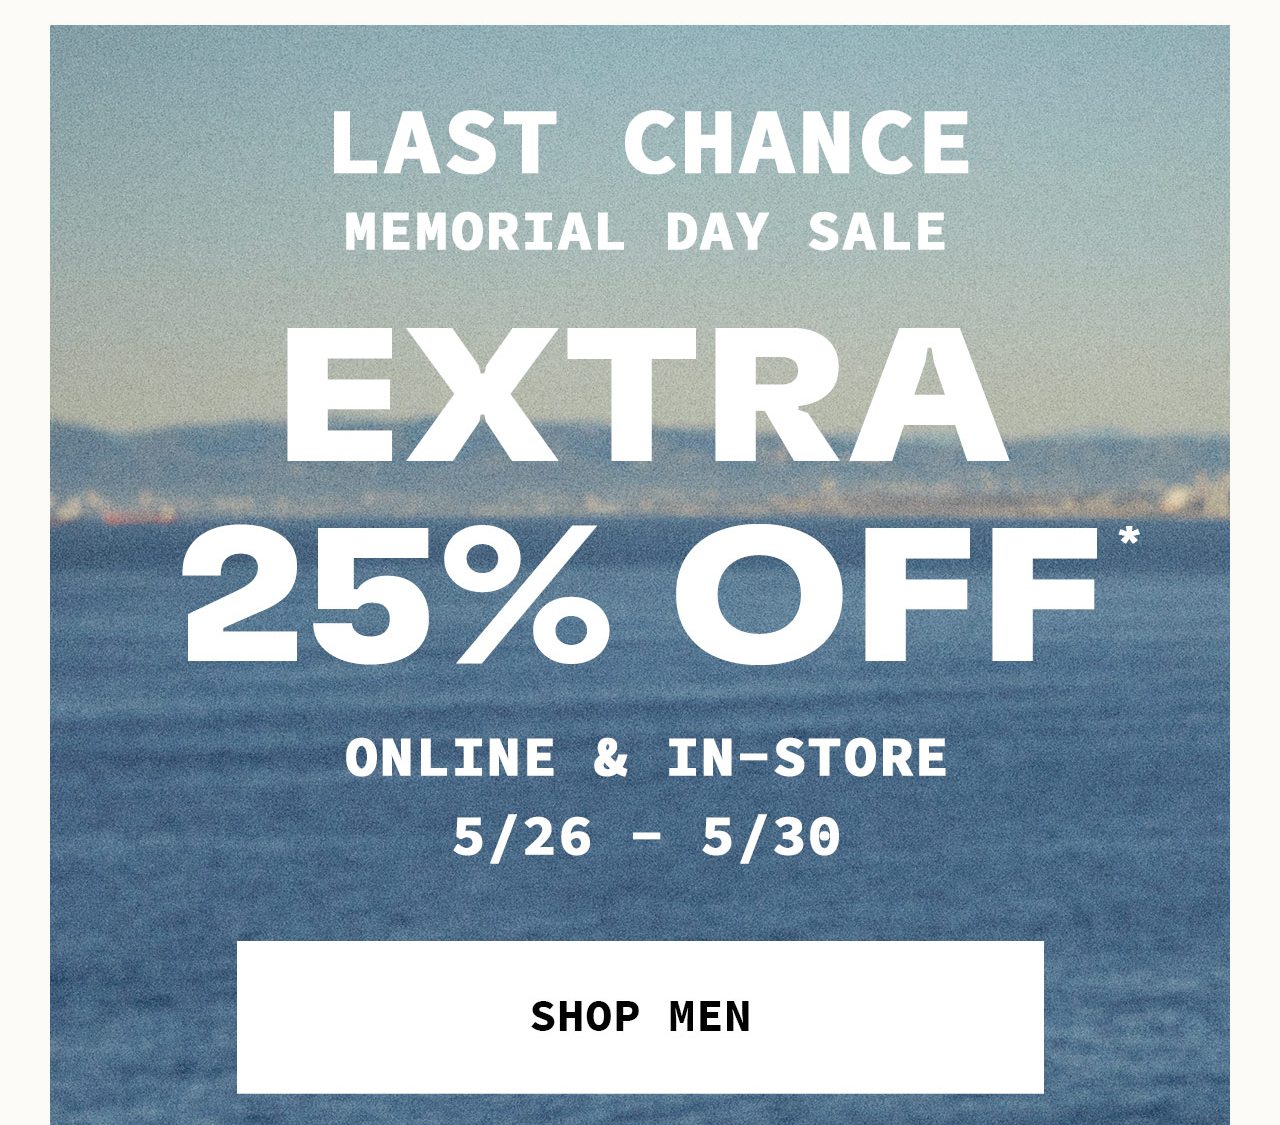 Last Chance Memorial Day Sale Extra 25% Off Online & In-Store 5/26 - 5/30